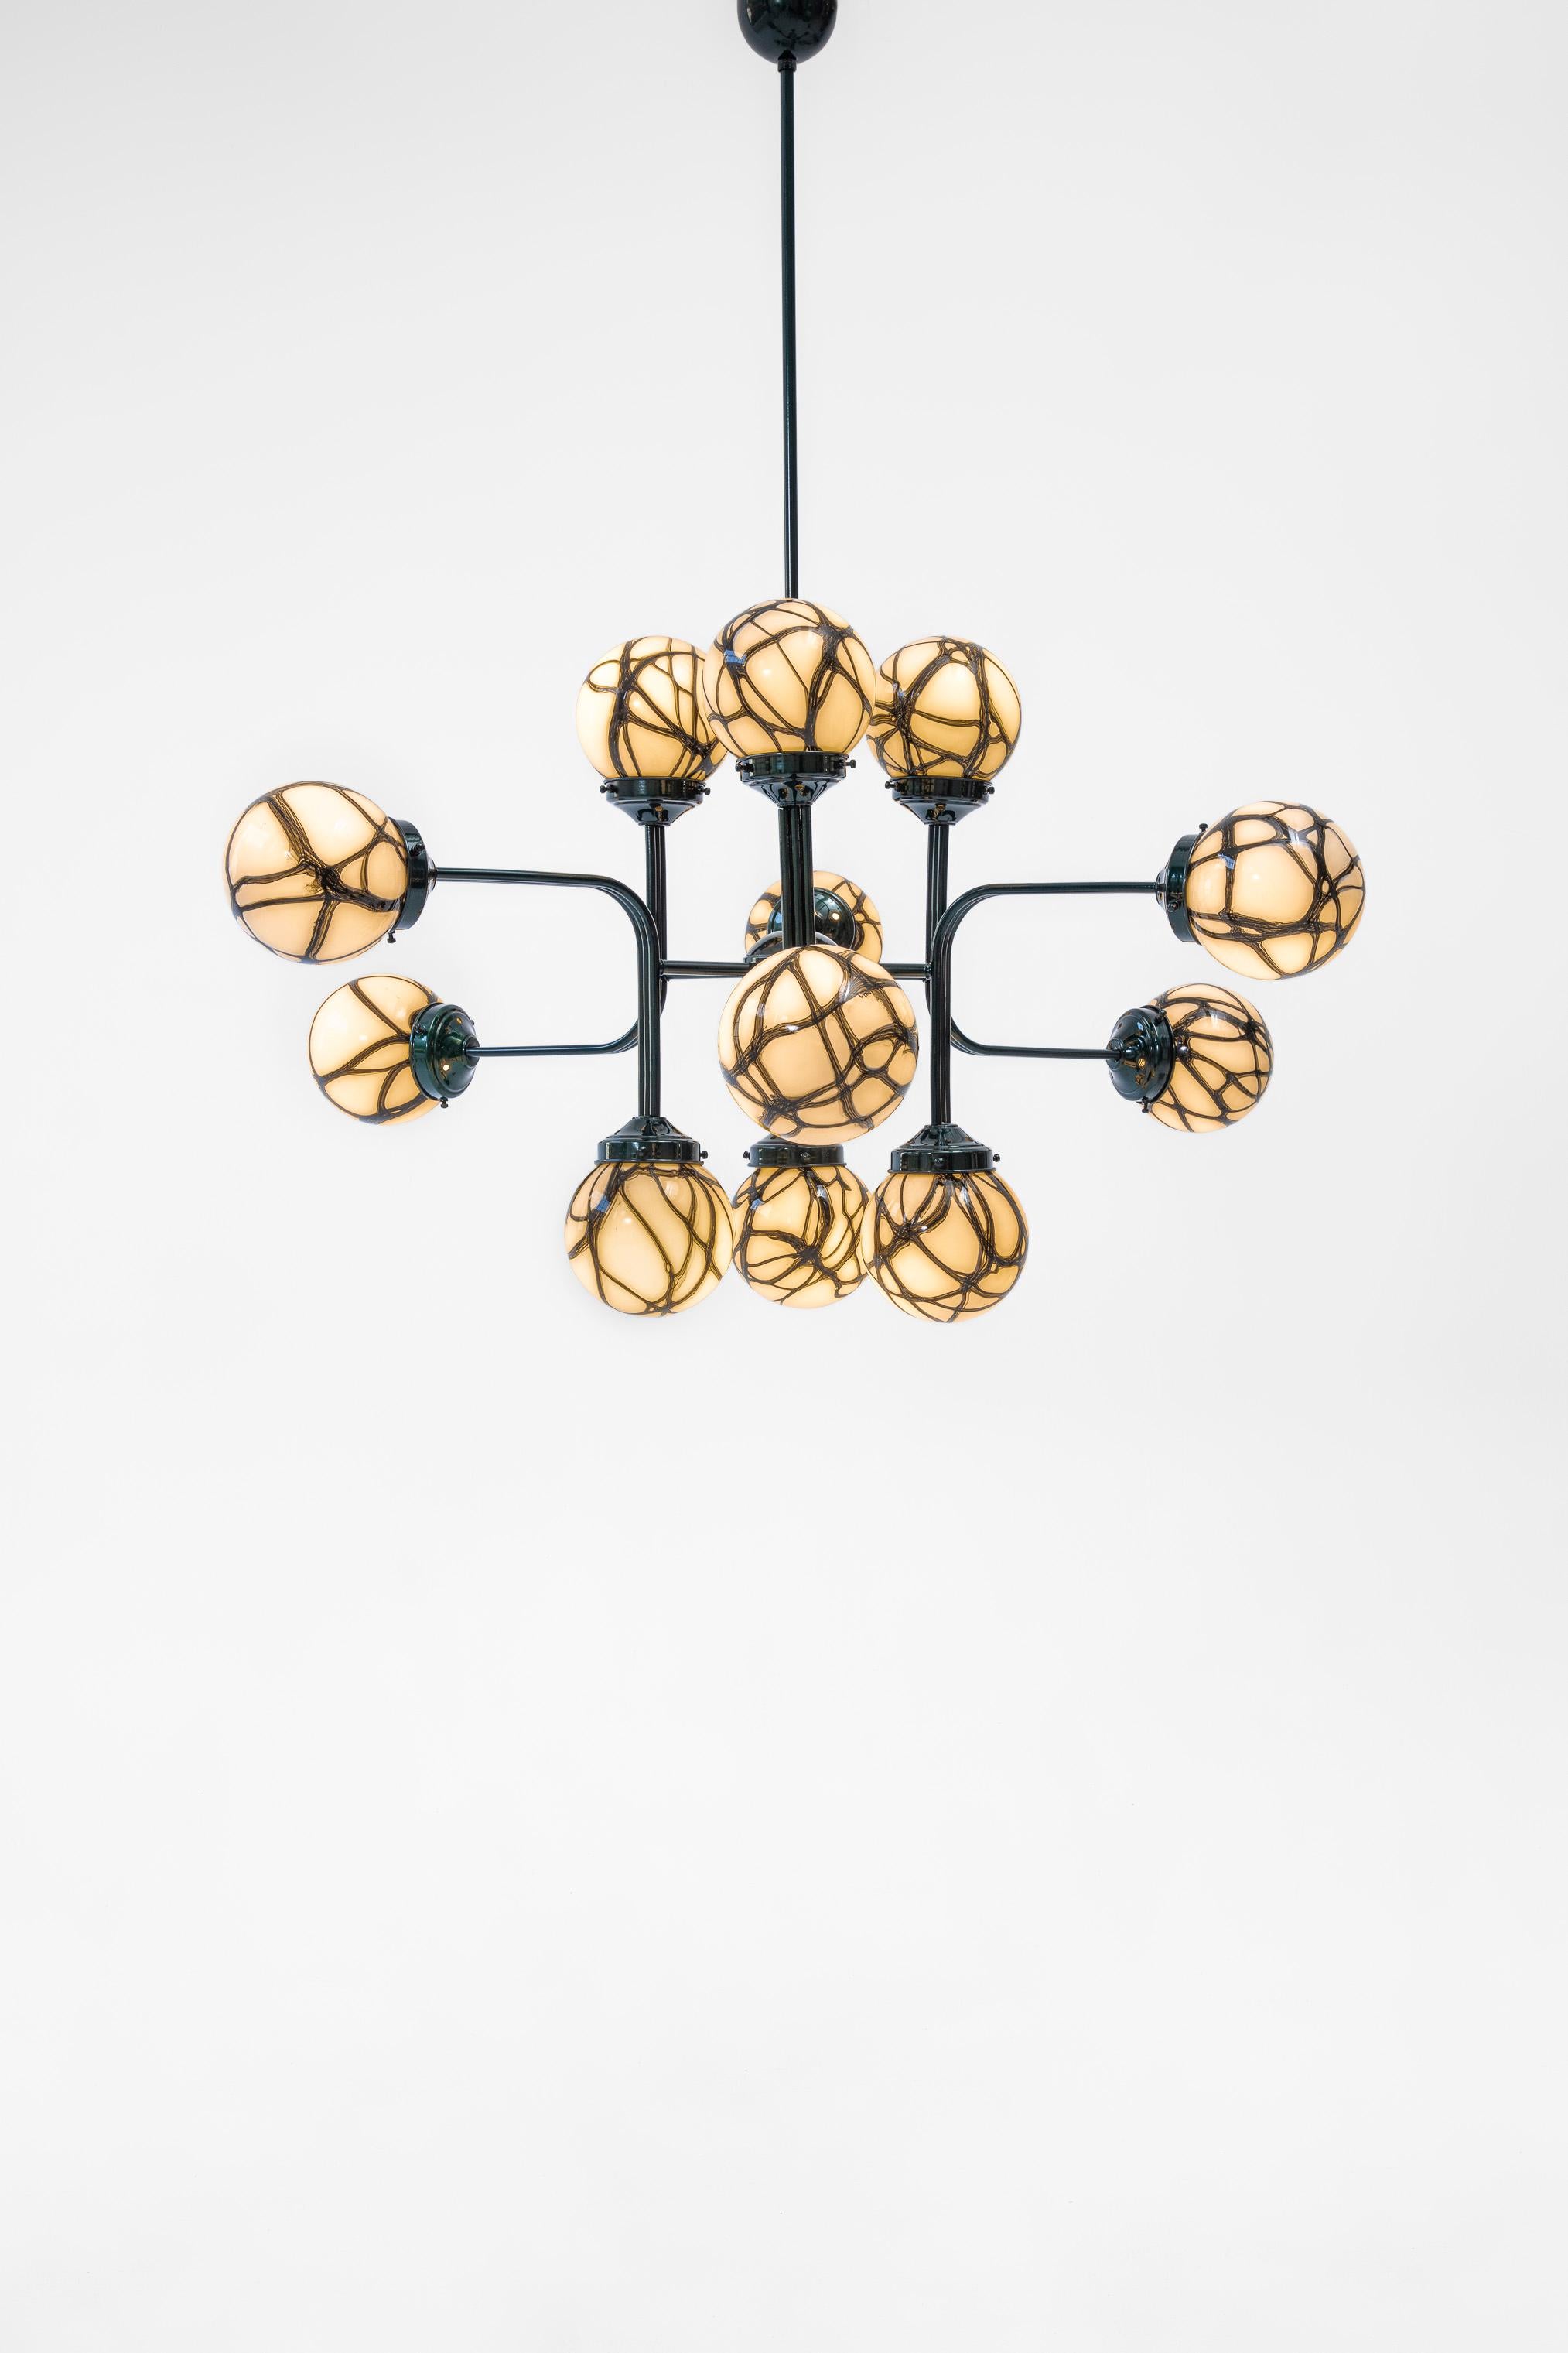 “Ziron” is an entirely handmade chandelier inspired by antique handblown glasses. Each handblown glass dome is unique with different patterns and harmonize with each other in an elegant way. Metallic green painted pieces are bent and connected